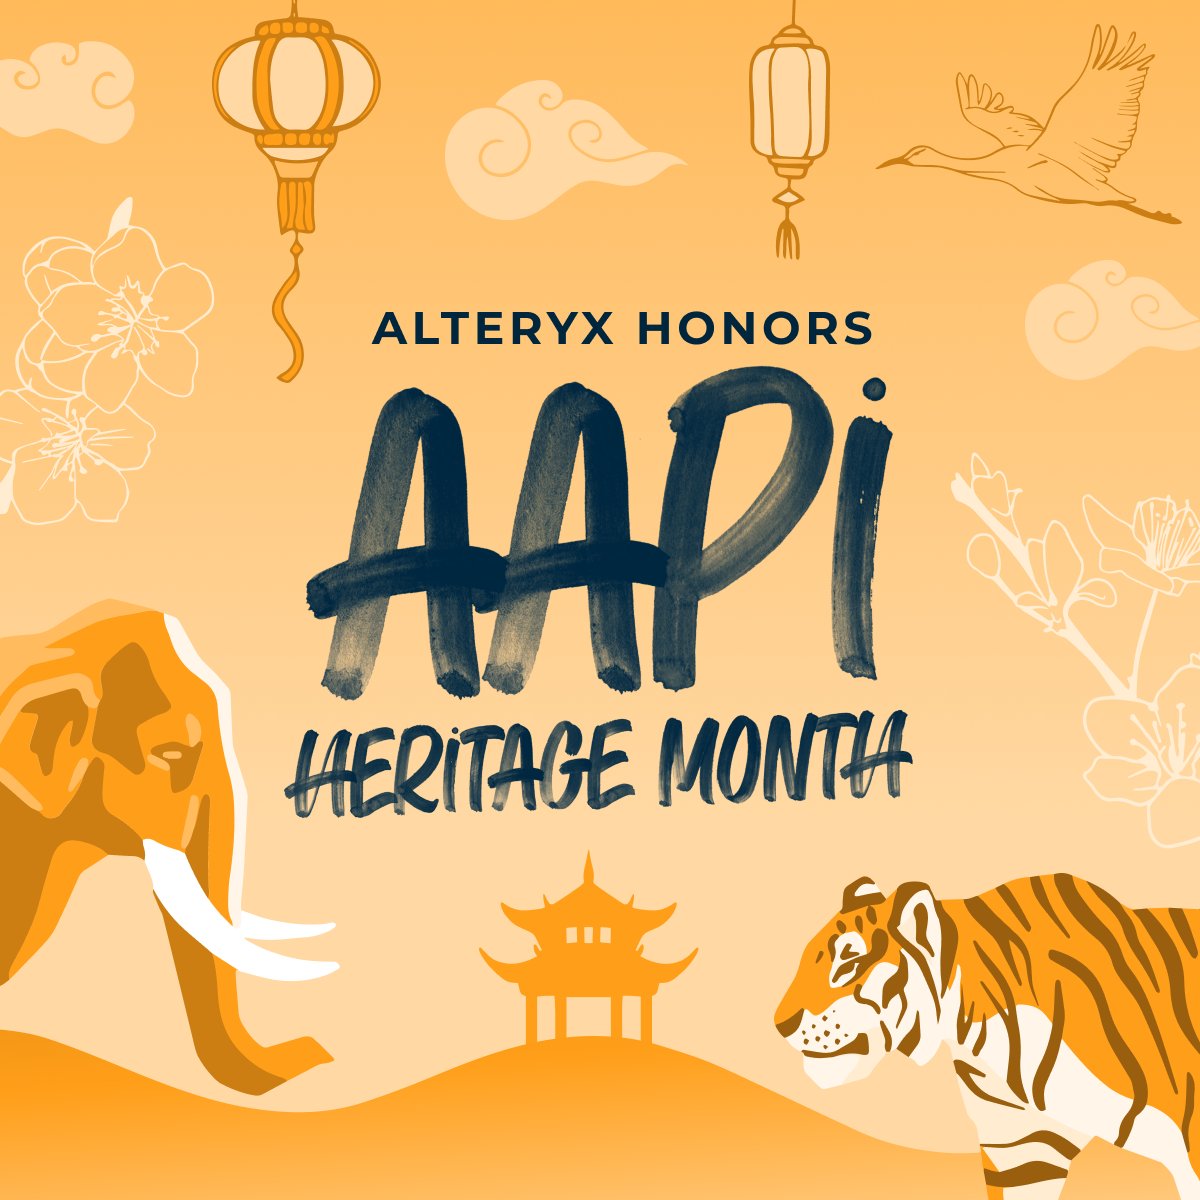 May marks Asian American, Native Hawaiian, and Pacific Islander Heritage Month, and here at Alteryx, we're proud to honor and celebrate the vibrant cultures, histories, and contributions of the AAPI community! #AAPIHeritageMonth #AlteryxMaveryx